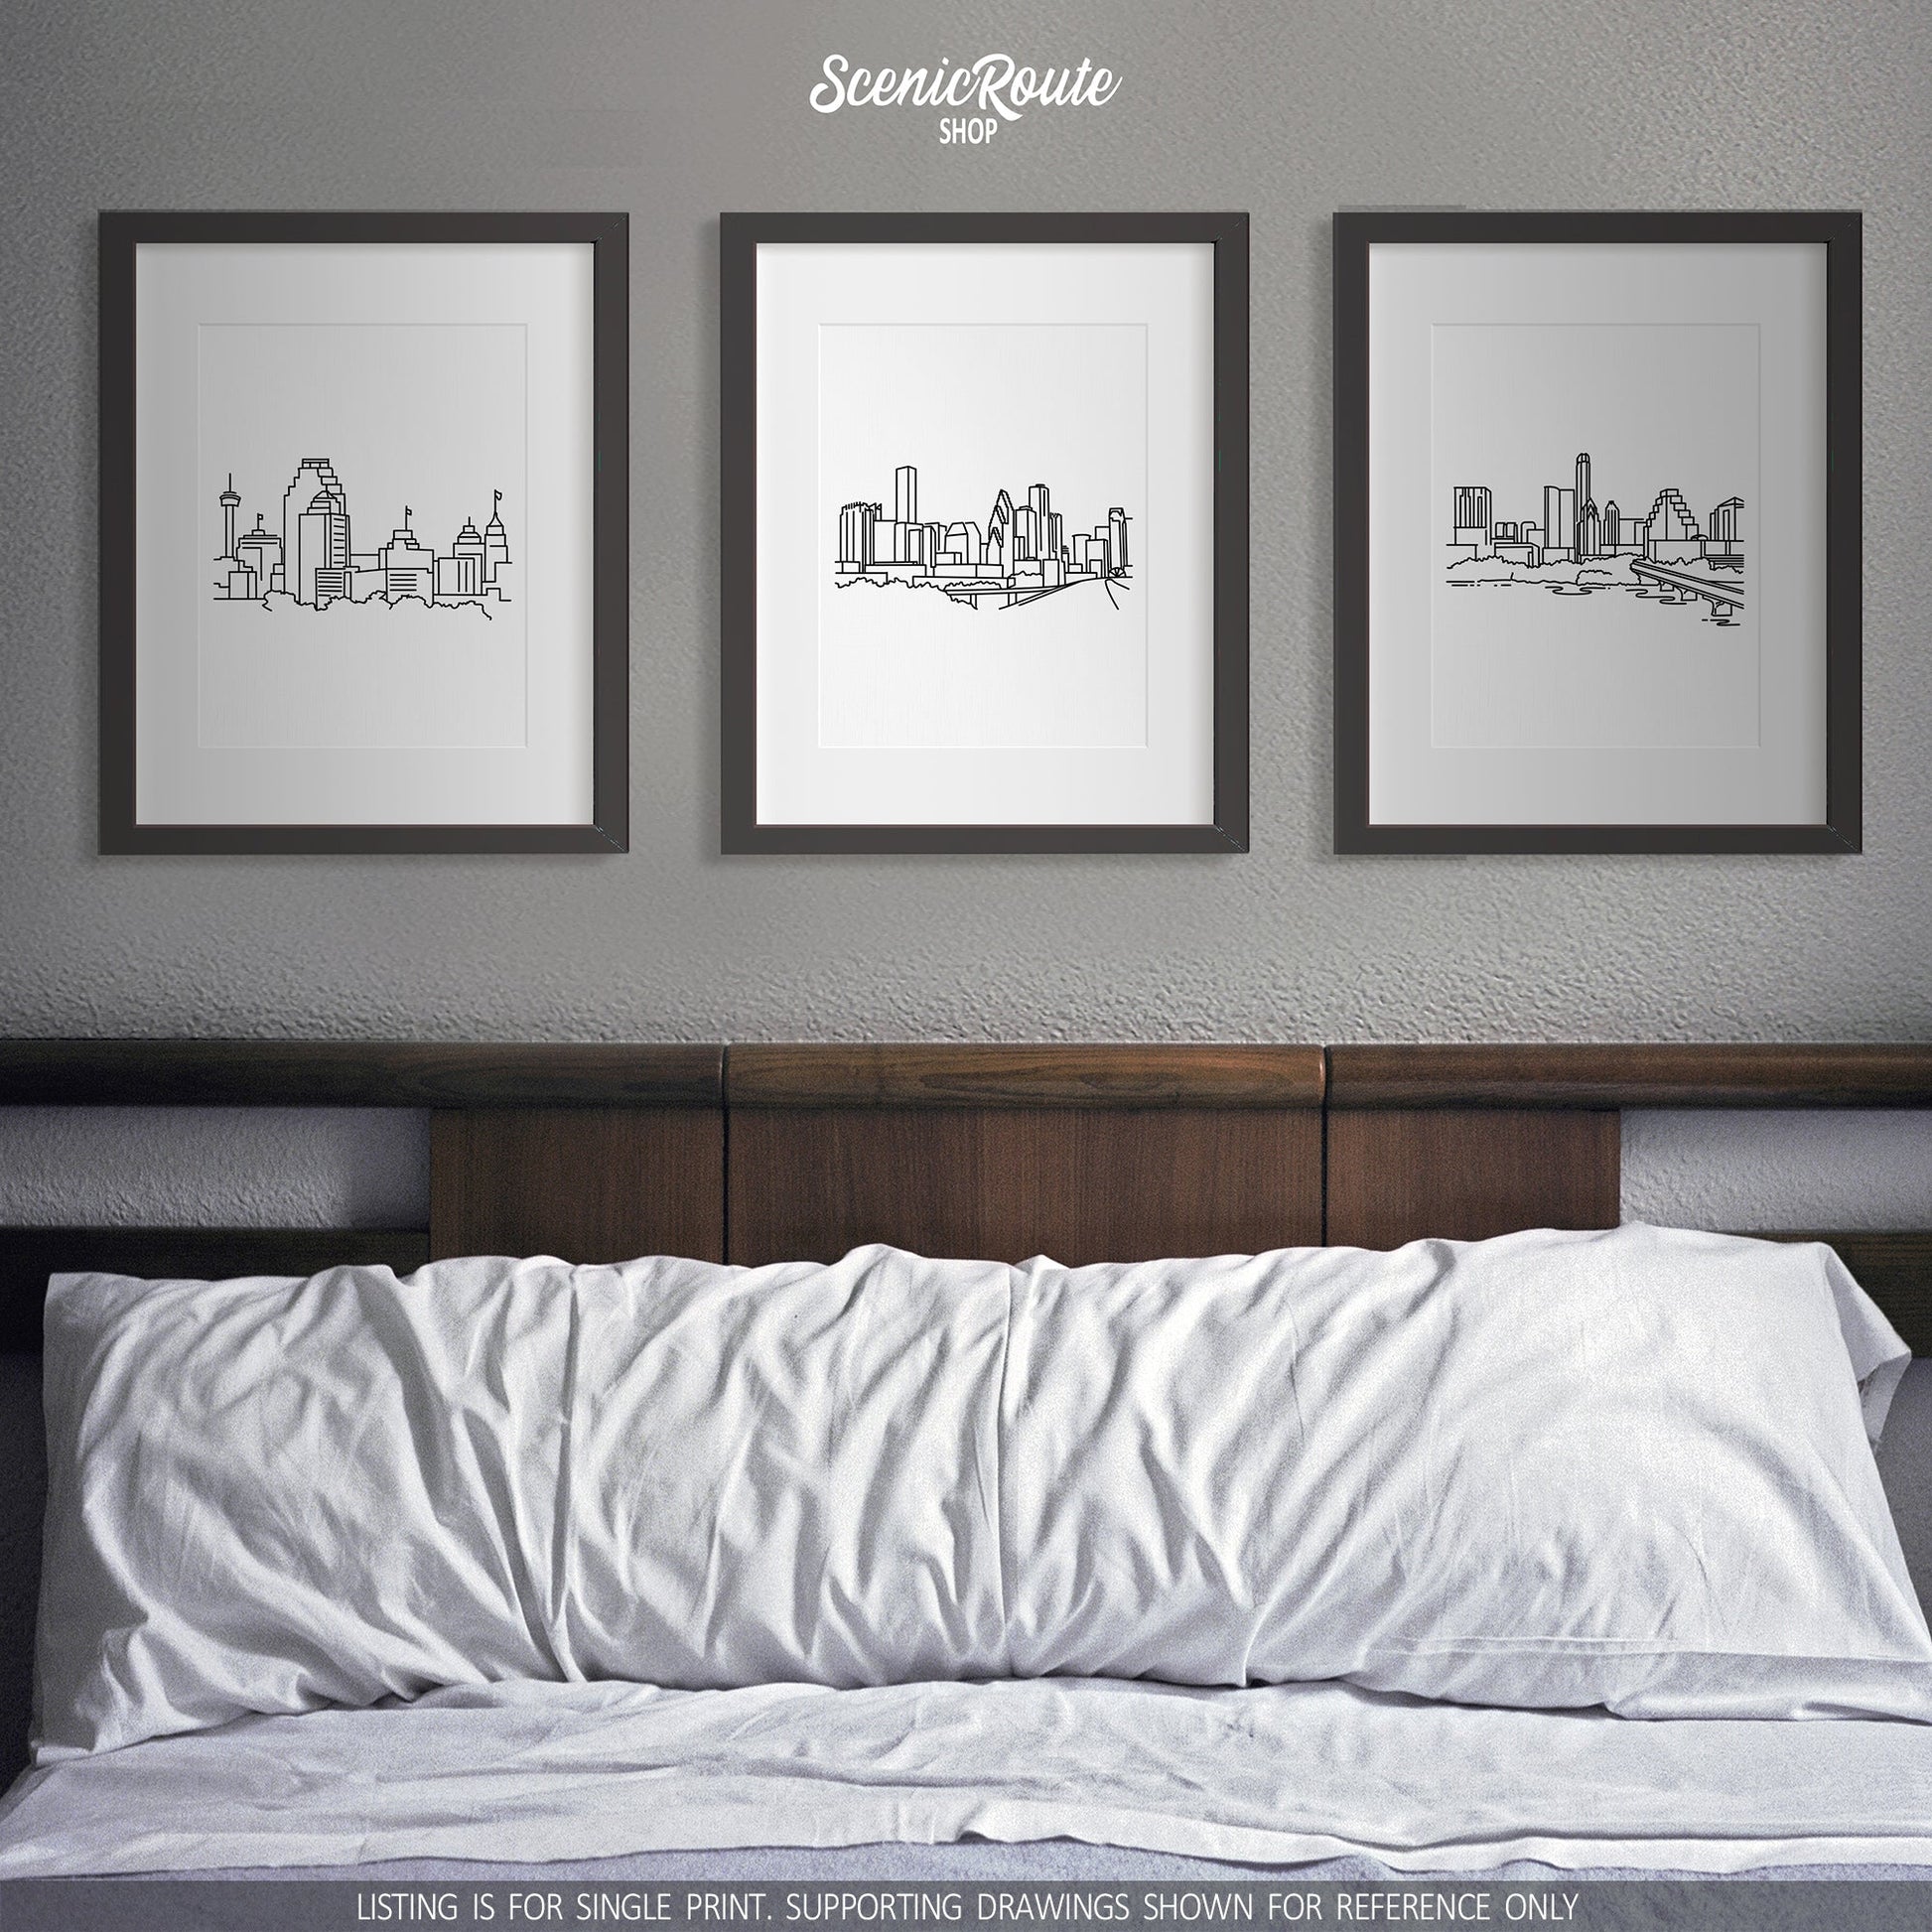 A group of three framed drawings on a white wall above a bed. The line art drawings include the San Antonio Skyline, Houston Skyline, and Austin Skyline